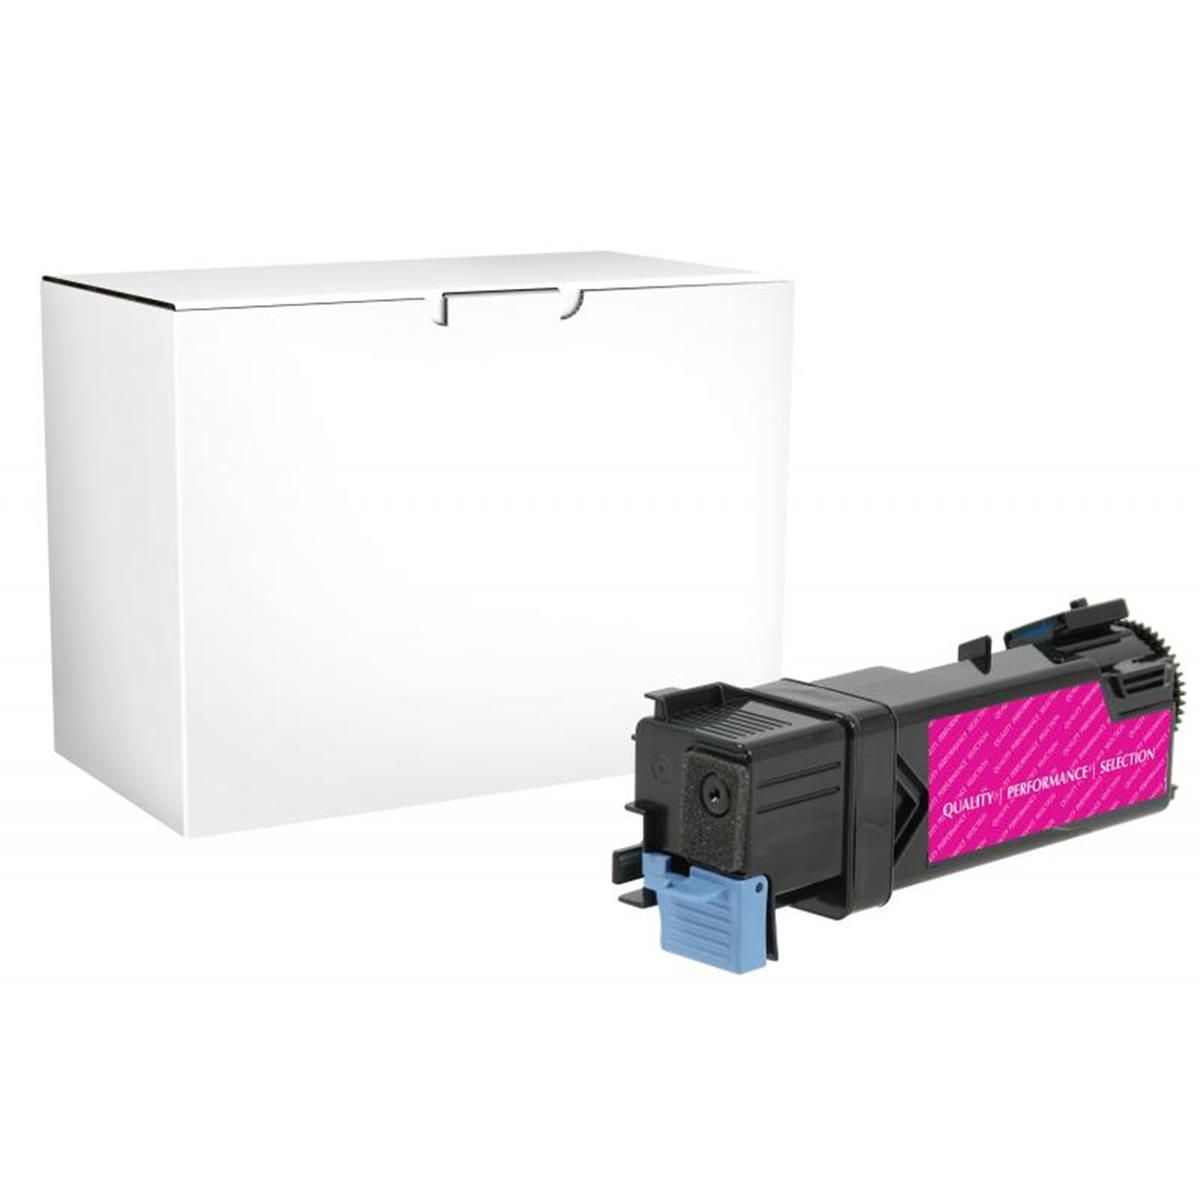 Picture of Dell 200658 High Yield Magenta Toner Cartridge for Dell 2150 & 2155